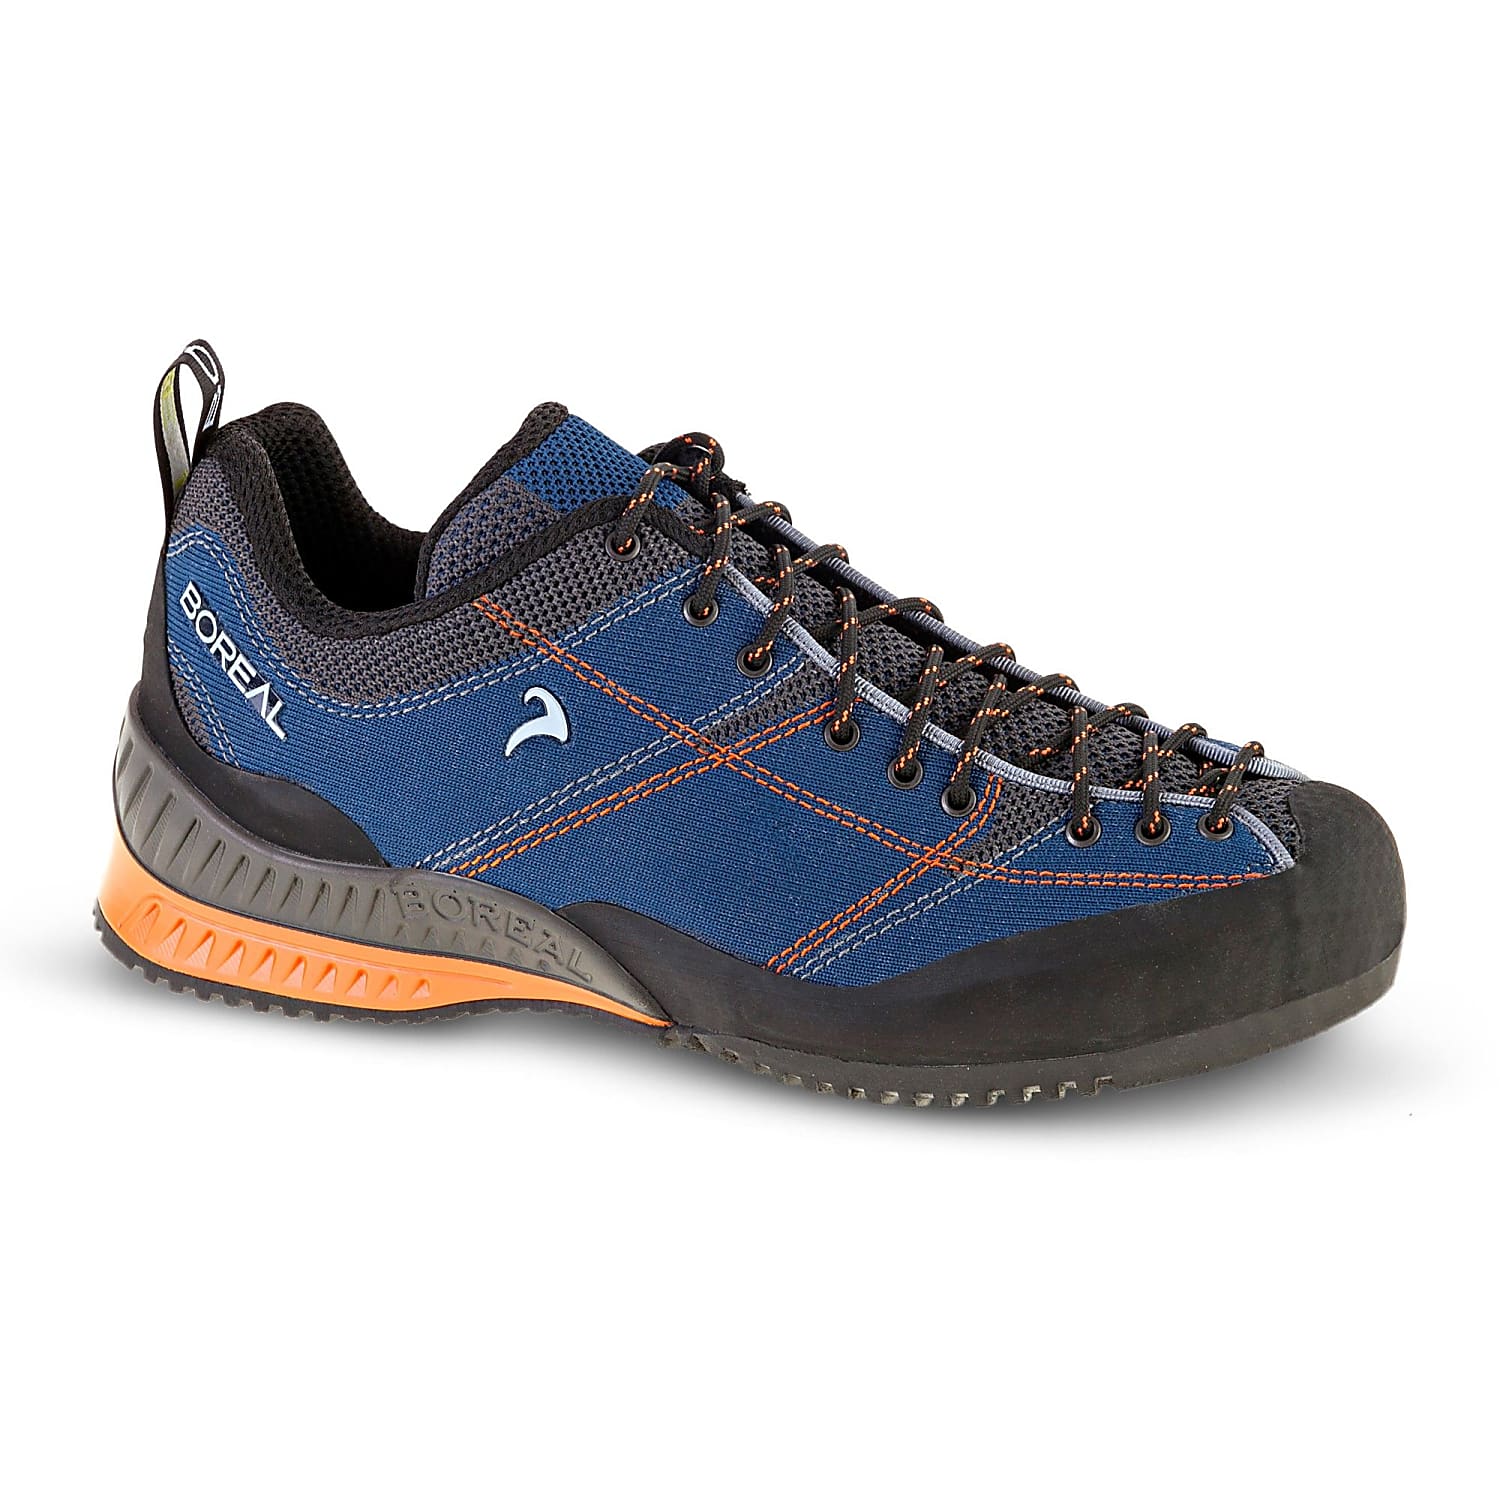 boreal approach shoes uk